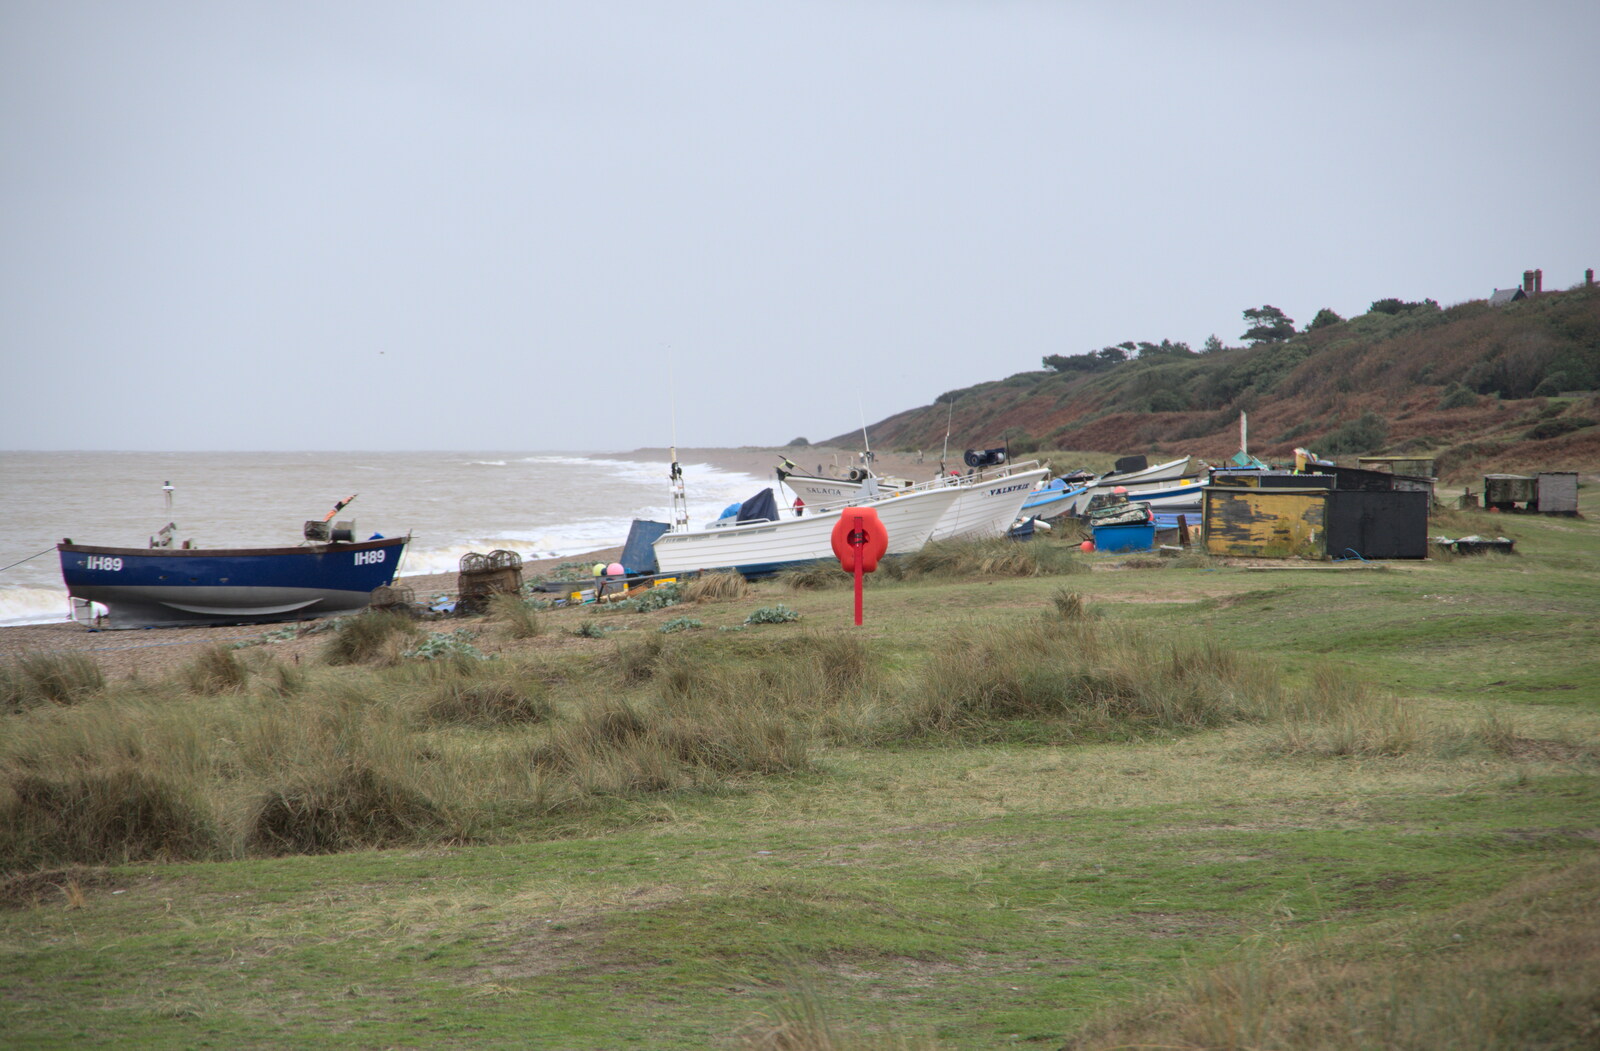 Fishing boats on the beach from Sizewell Beach and the Lion Pub, Sizewell and Theberton, Suffolk - 4th October 2020